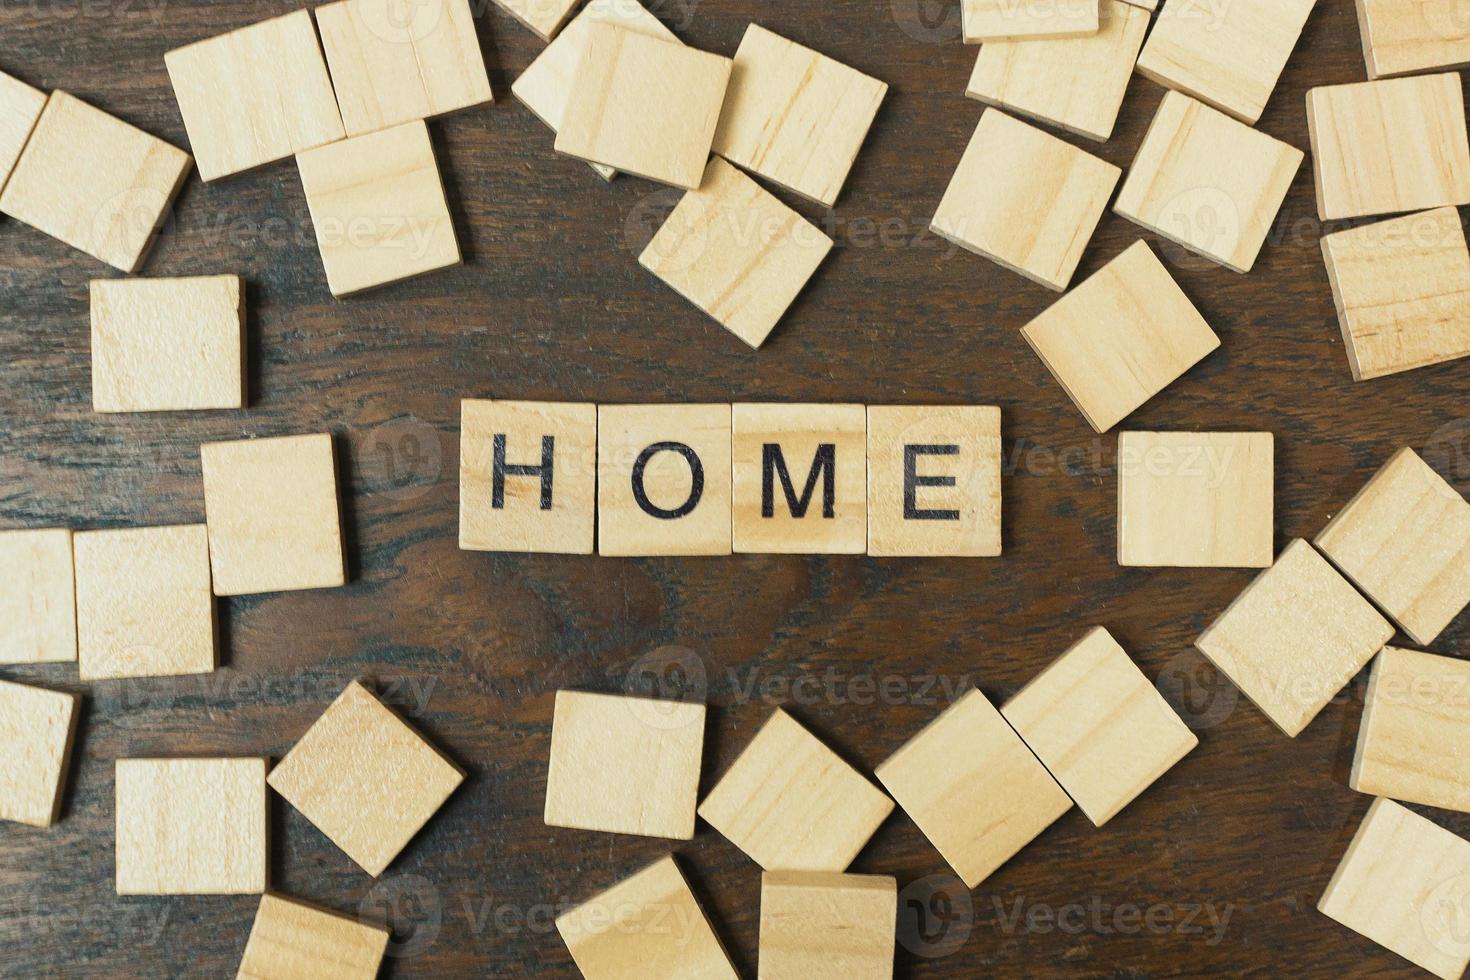 Home word on wood plate abstract background. photo